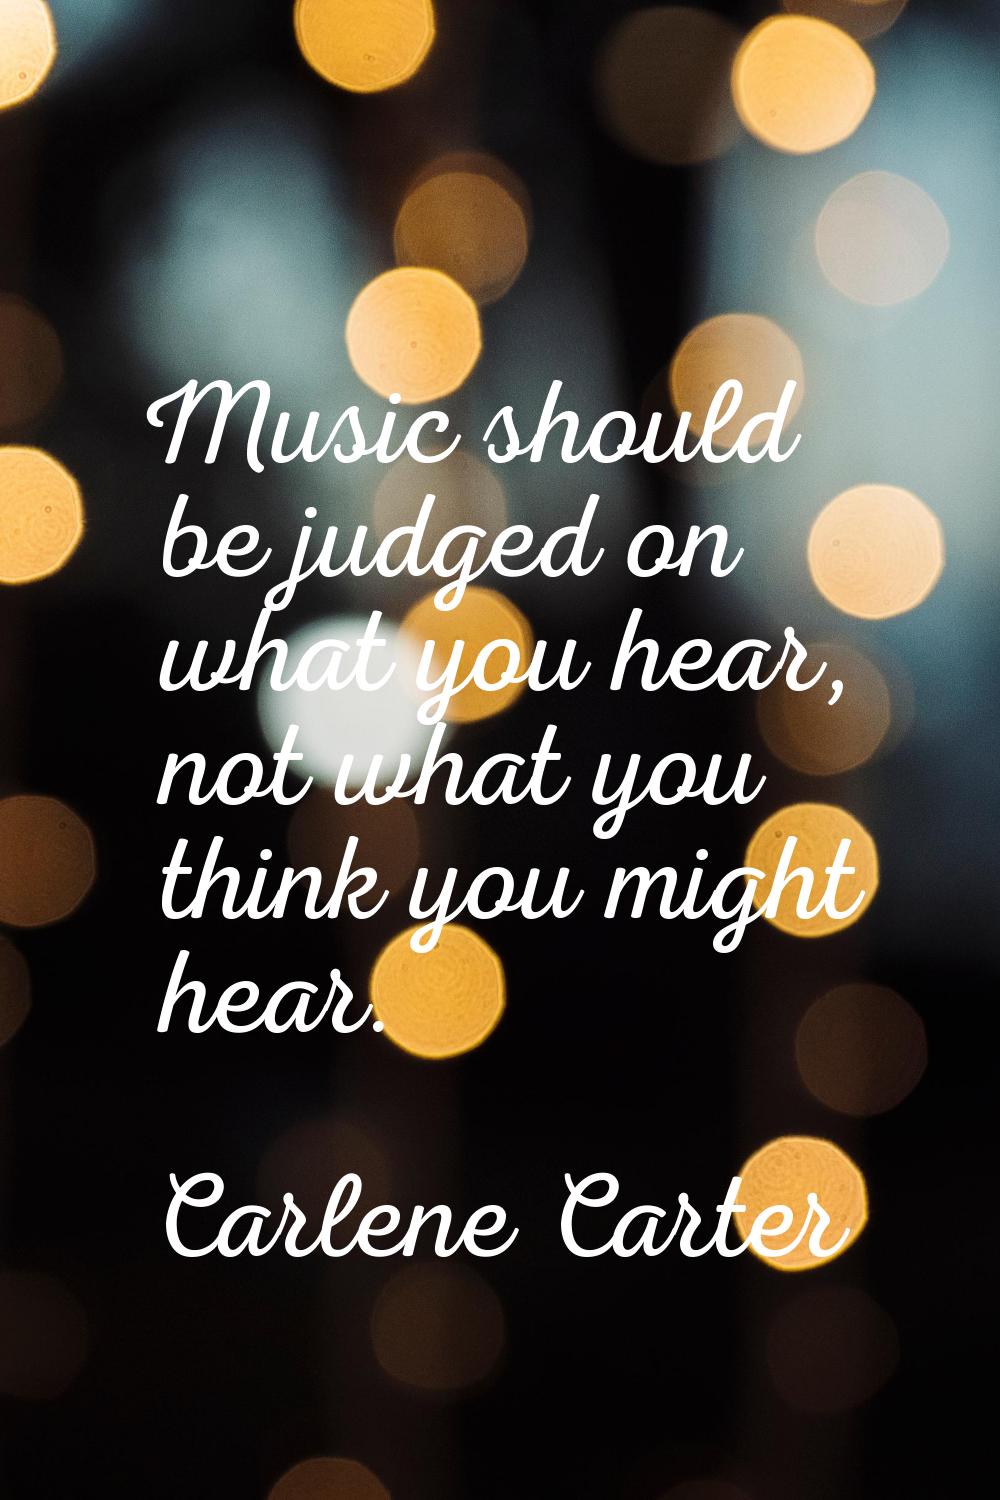 Music should be judged on what you hear, not what you think you might hear.